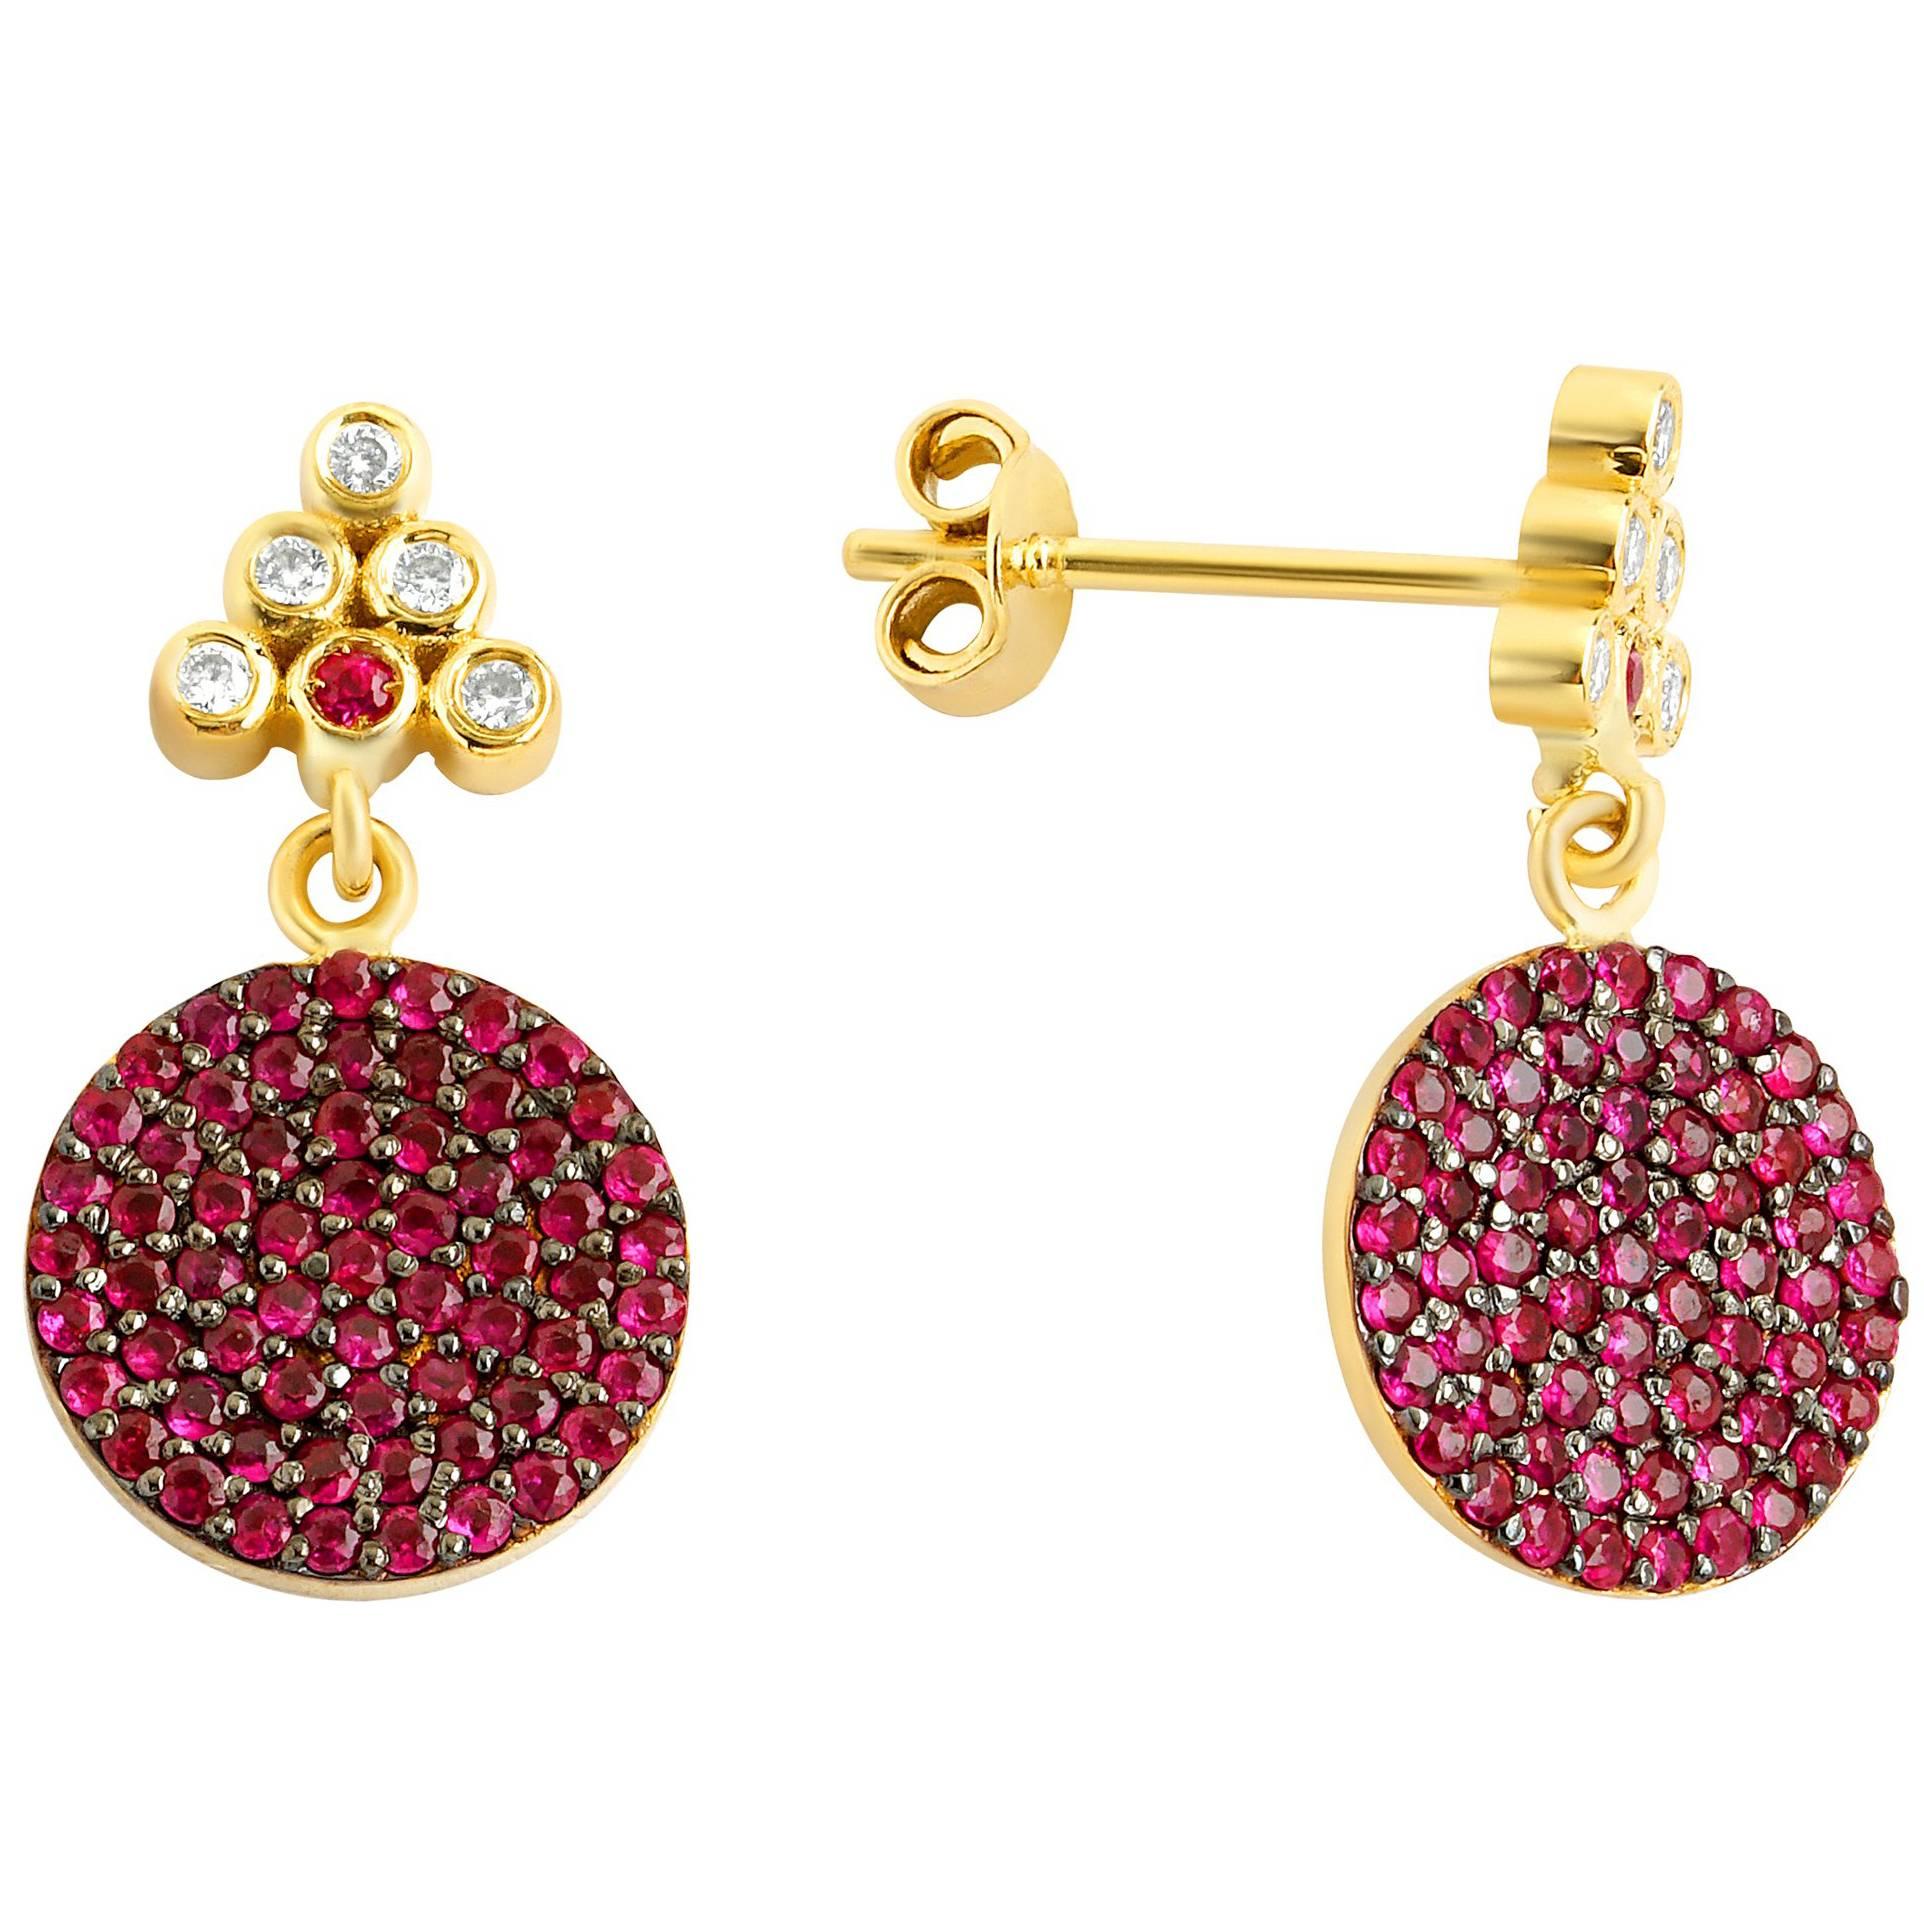 Seraphina 1.28 Carats Mozambique Rubies Drop Earrings For Sale